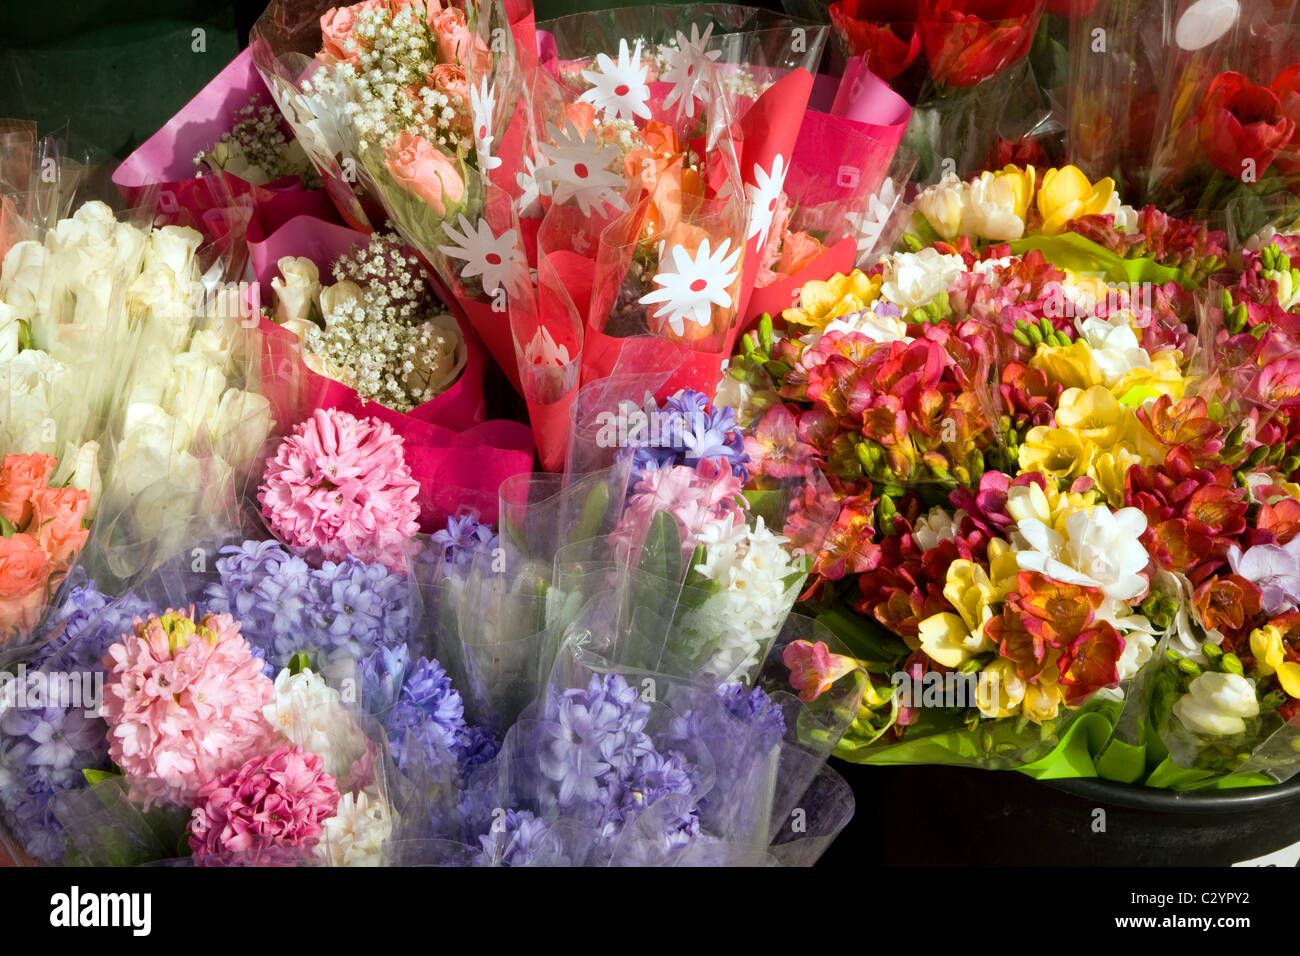 Colourful bouquets flowers bunches for sale Guernsey Channel Islands ...